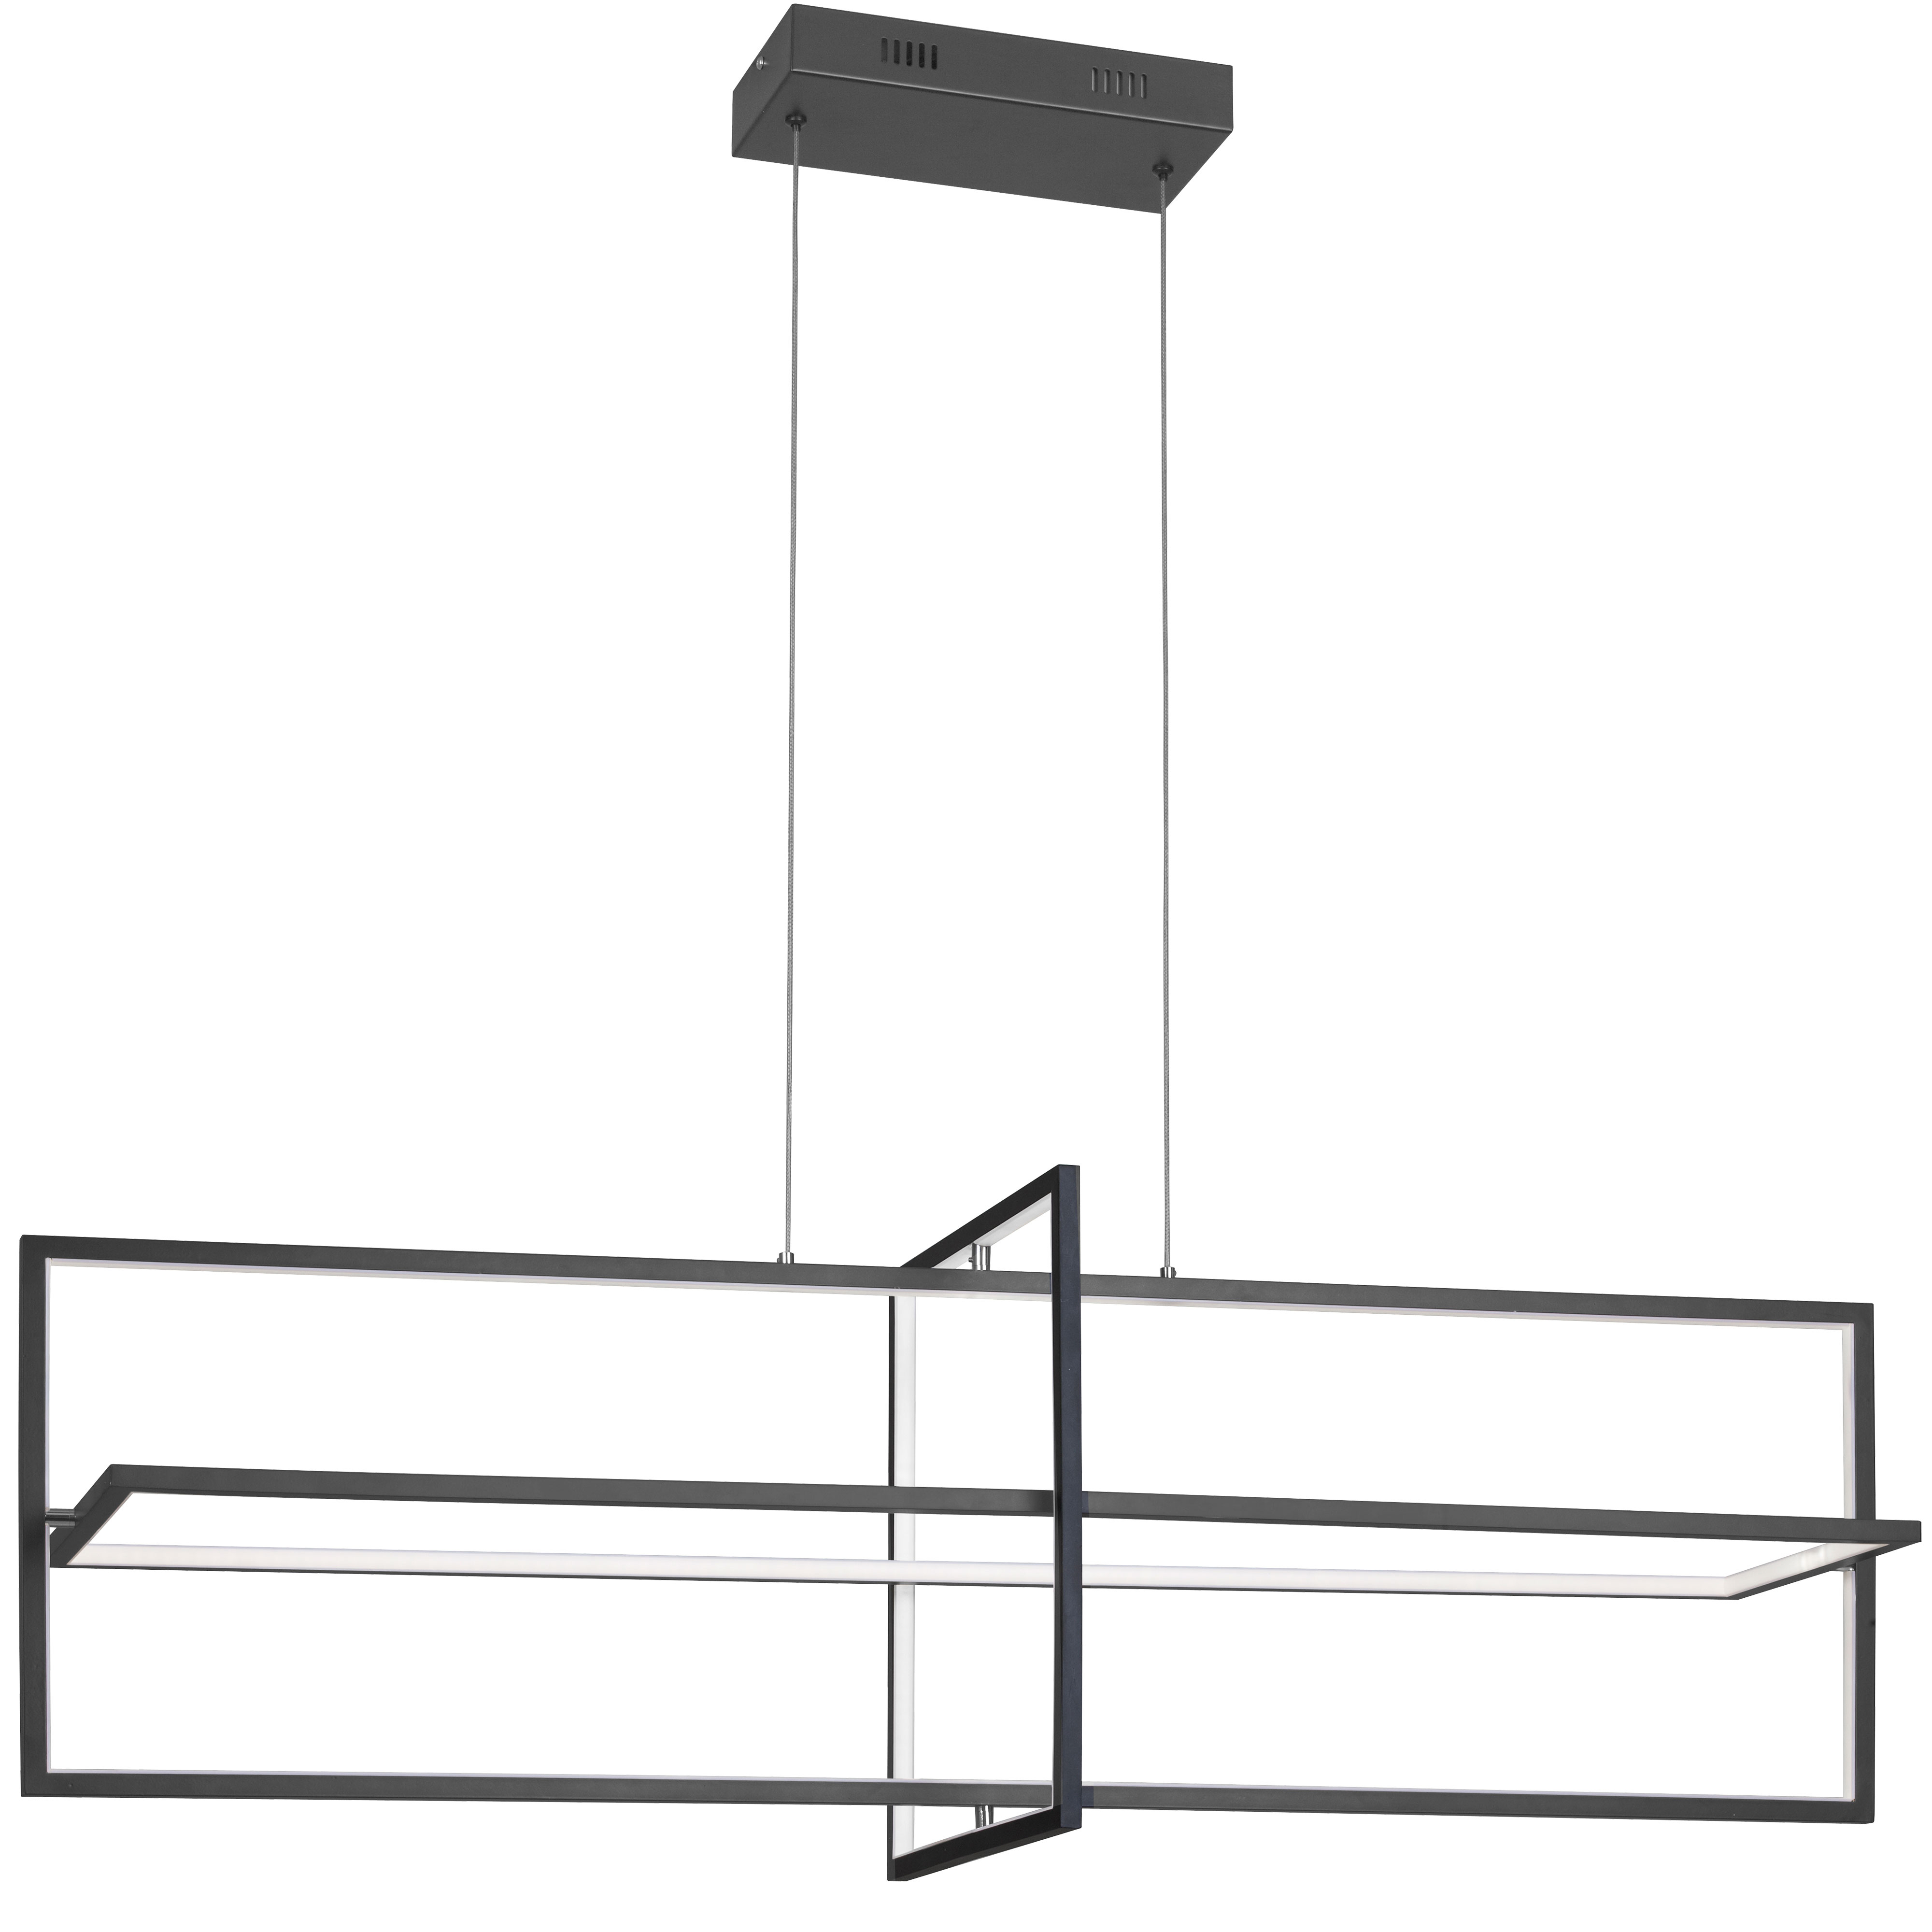 Strikingly artistic with a strong horizontal focus, the Hildegard chandelier offers arresting design in an airy configuration that won't dominate the room. The design features an integrated LED light. LED fixtures produce light at up to 90 percent better efficiency than incandescent lighting. The metal frame in sleek matte black combines three rectangular frames. Along the inside of each frame, a white acrylic diffuser softens the LED lighting to a glow that's flattering to any skin tone. With its vertical footprint and elegant modernism, the Hildegard chandelier works well in a living or dining room, or above a bar area.